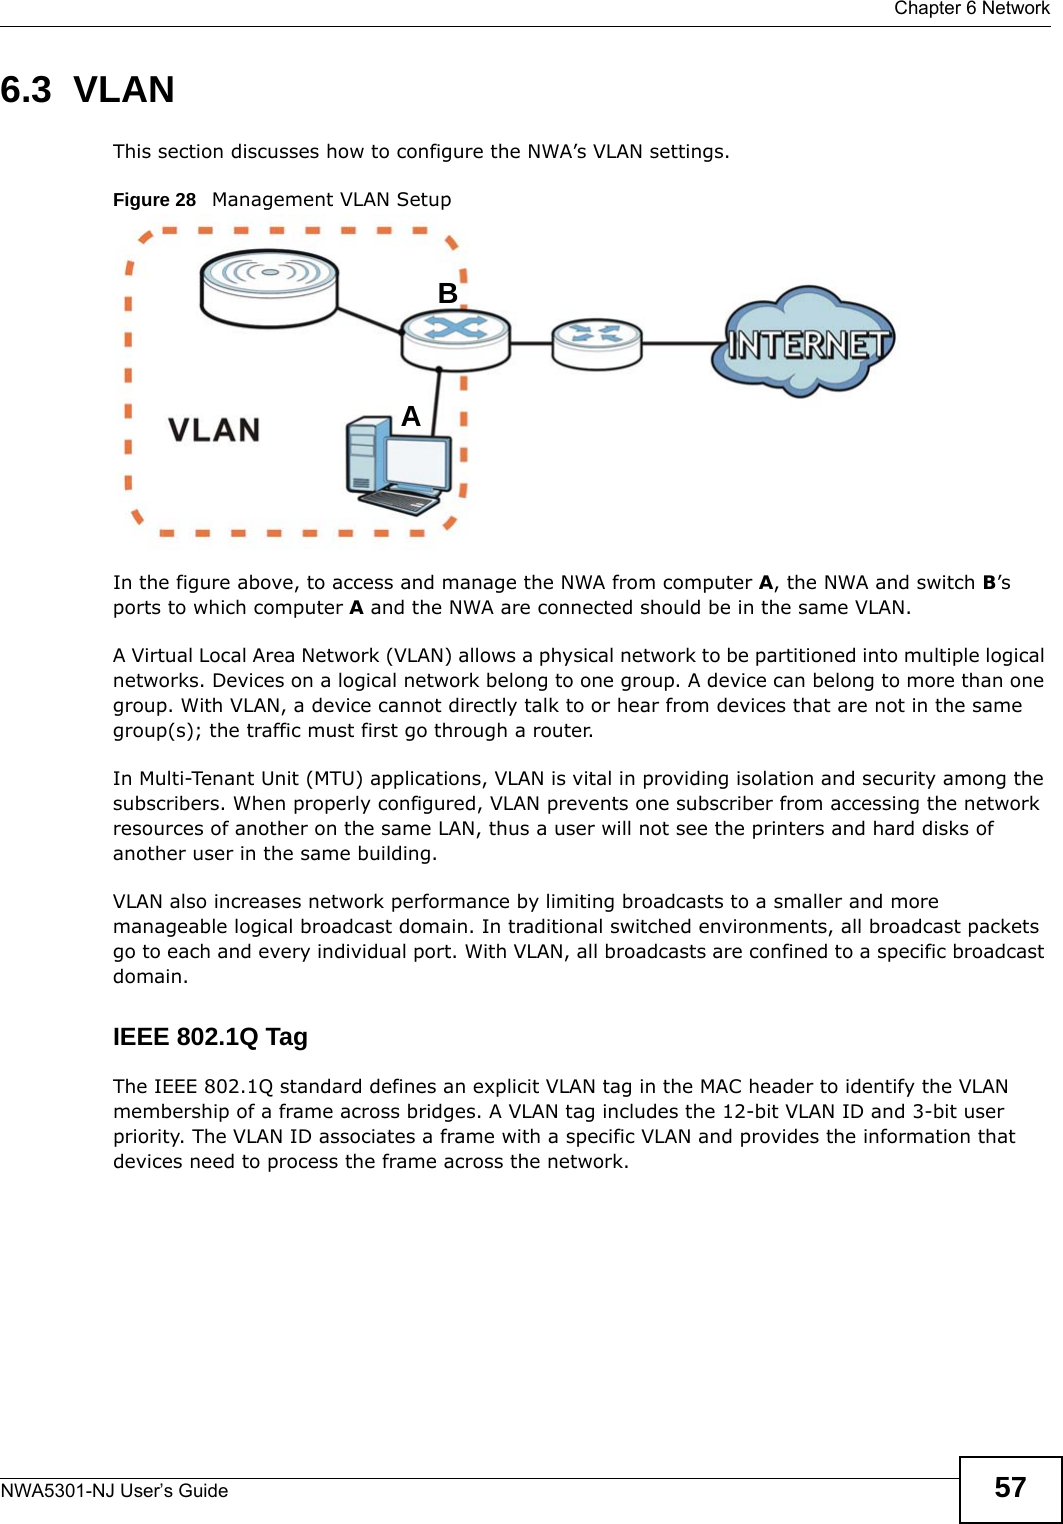  Chapter 6 NetworkNWA5301-NJ User’s Guide 576.3  VLANThis section discusses how to configure the NWA’s VLAN settings.Figure 28   Management VLAN SetupIn the figure above, to access and manage the NWA from computer A, the NWA and switch B’s ports to which computer A and the NWA are connected should be in the same VLAN.A Virtual Local Area Network (VLAN) allows a physical network to be partitioned into multiple logical networks. Devices on a logical network belong to one group. A device can belong to more than one group. With VLAN, a device cannot directly talk to or hear from devices that are not in the same group(s); the traffic must first go through a router.In Multi-Tenant Unit (MTU) applications, VLAN is vital in providing isolation and security among the subscribers. When properly configured, VLAN prevents one subscriber from accessing the network resources of another on the same LAN, thus a user will not see the printers and hard disks of another user in the same building. VLAN also increases network performance by limiting broadcasts to a smaller and more manageable logical broadcast domain. In traditional switched environments, all broadcast packets go to each and every individual port. With VLAN, all broadcasts are confined to a specific broadcast domain. IEEE 802.1Q TagThe IEEE 802.1Q standard defines an explicit VLAN tag in the MAC header to identify the VLAN membership of a frame across bridges. A VLAN tag includes the 12-bit VLAN ID and 3-bit user priority. The VLAN ID associates a frame with a specific VLAN and provides the information that devices need to process the frame across the network. AB